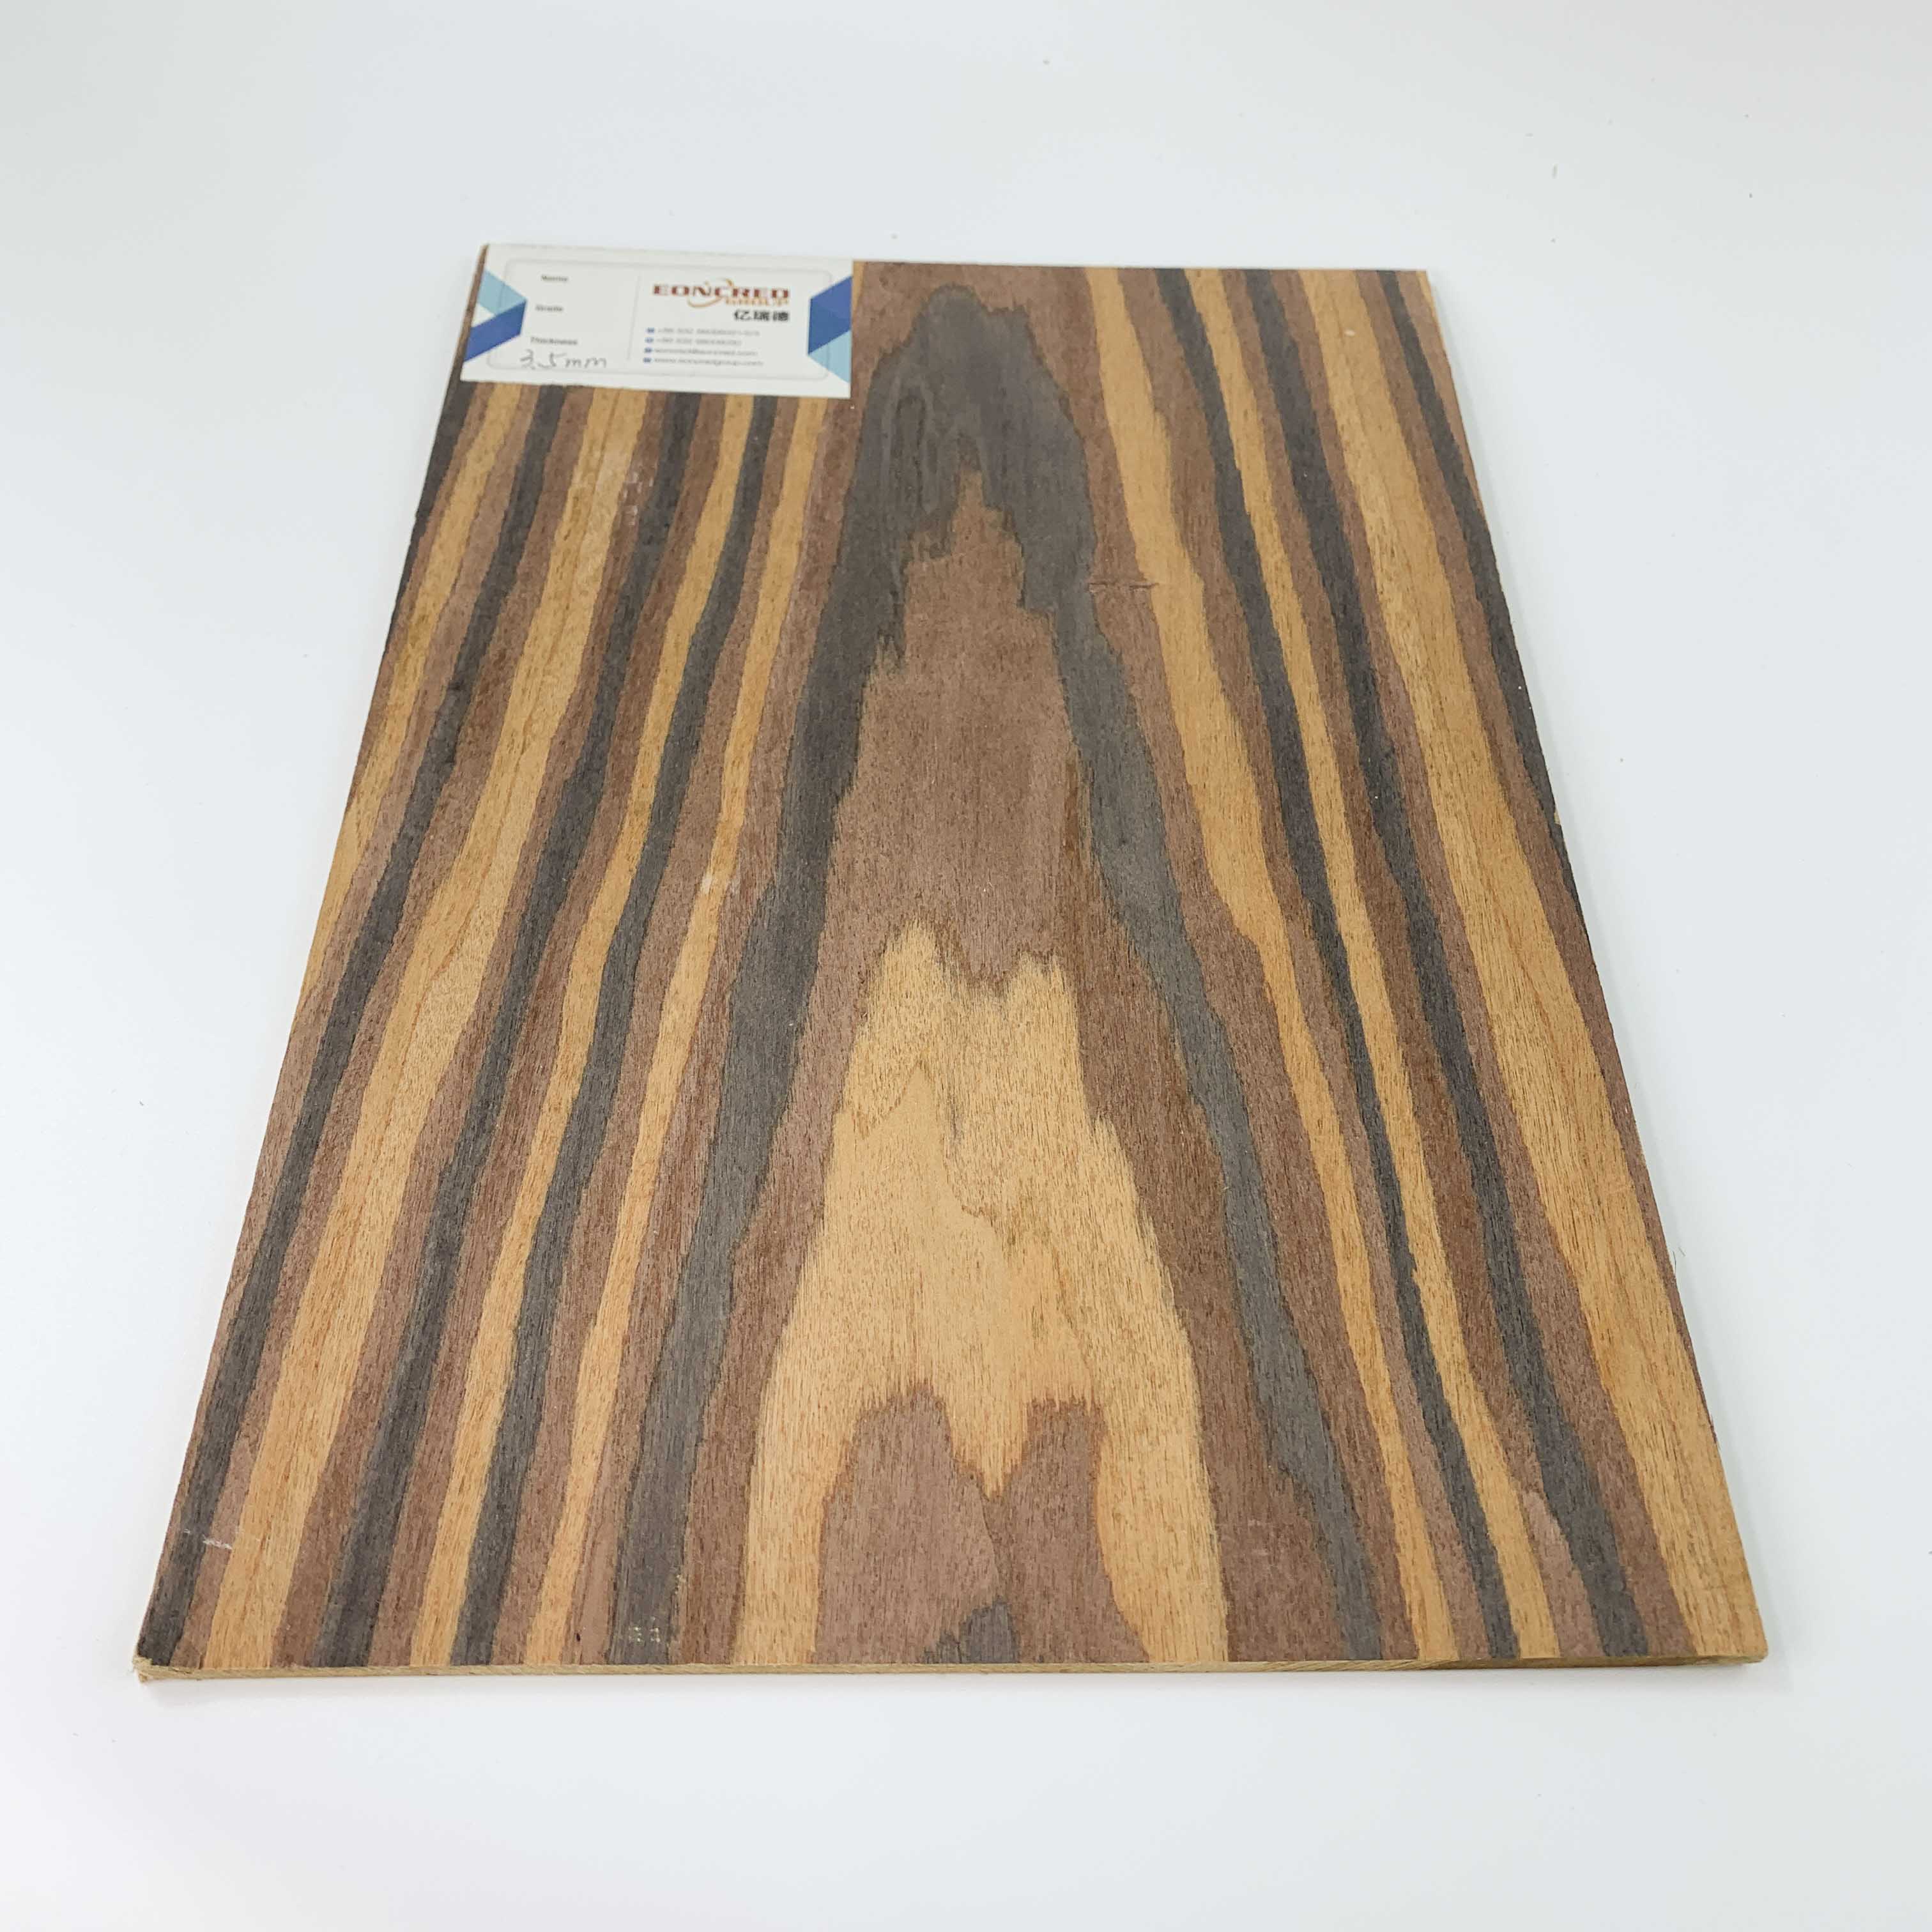 The features and uses for laminated MDF